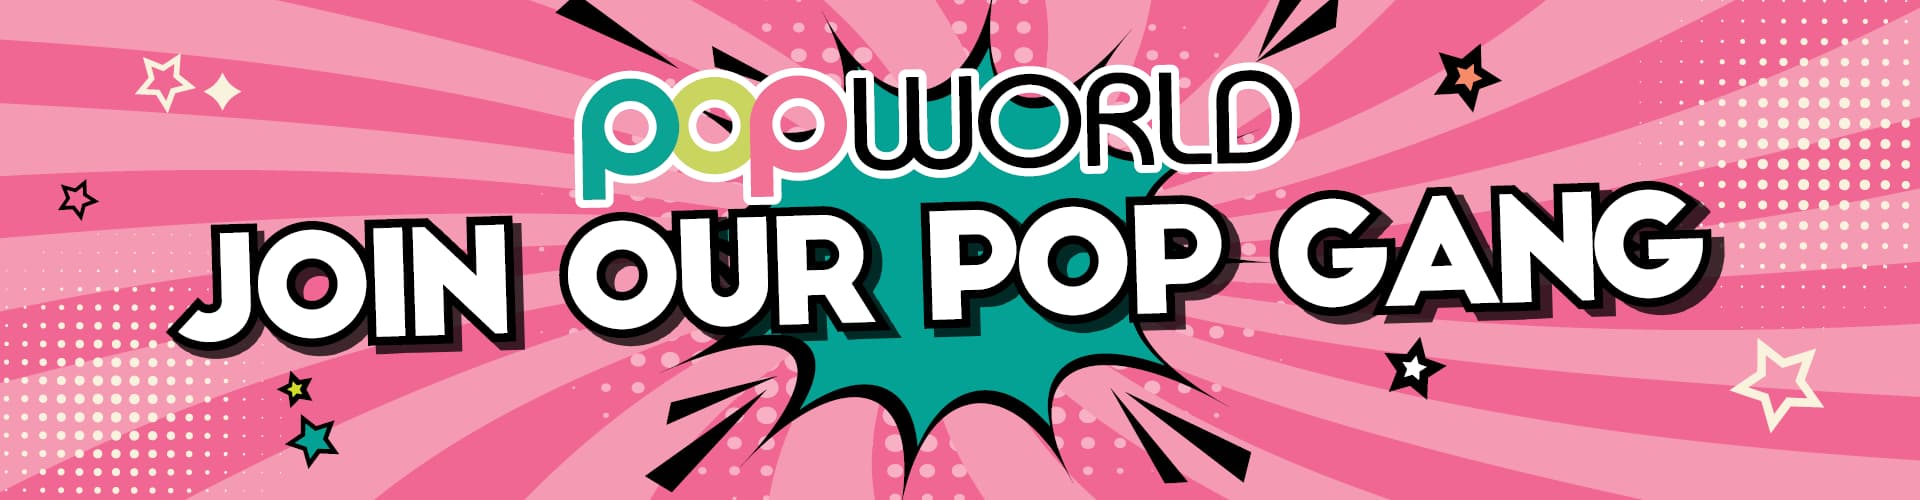 Join our Popworld & Zinc Weston-Super-Mare gang! Sign up today